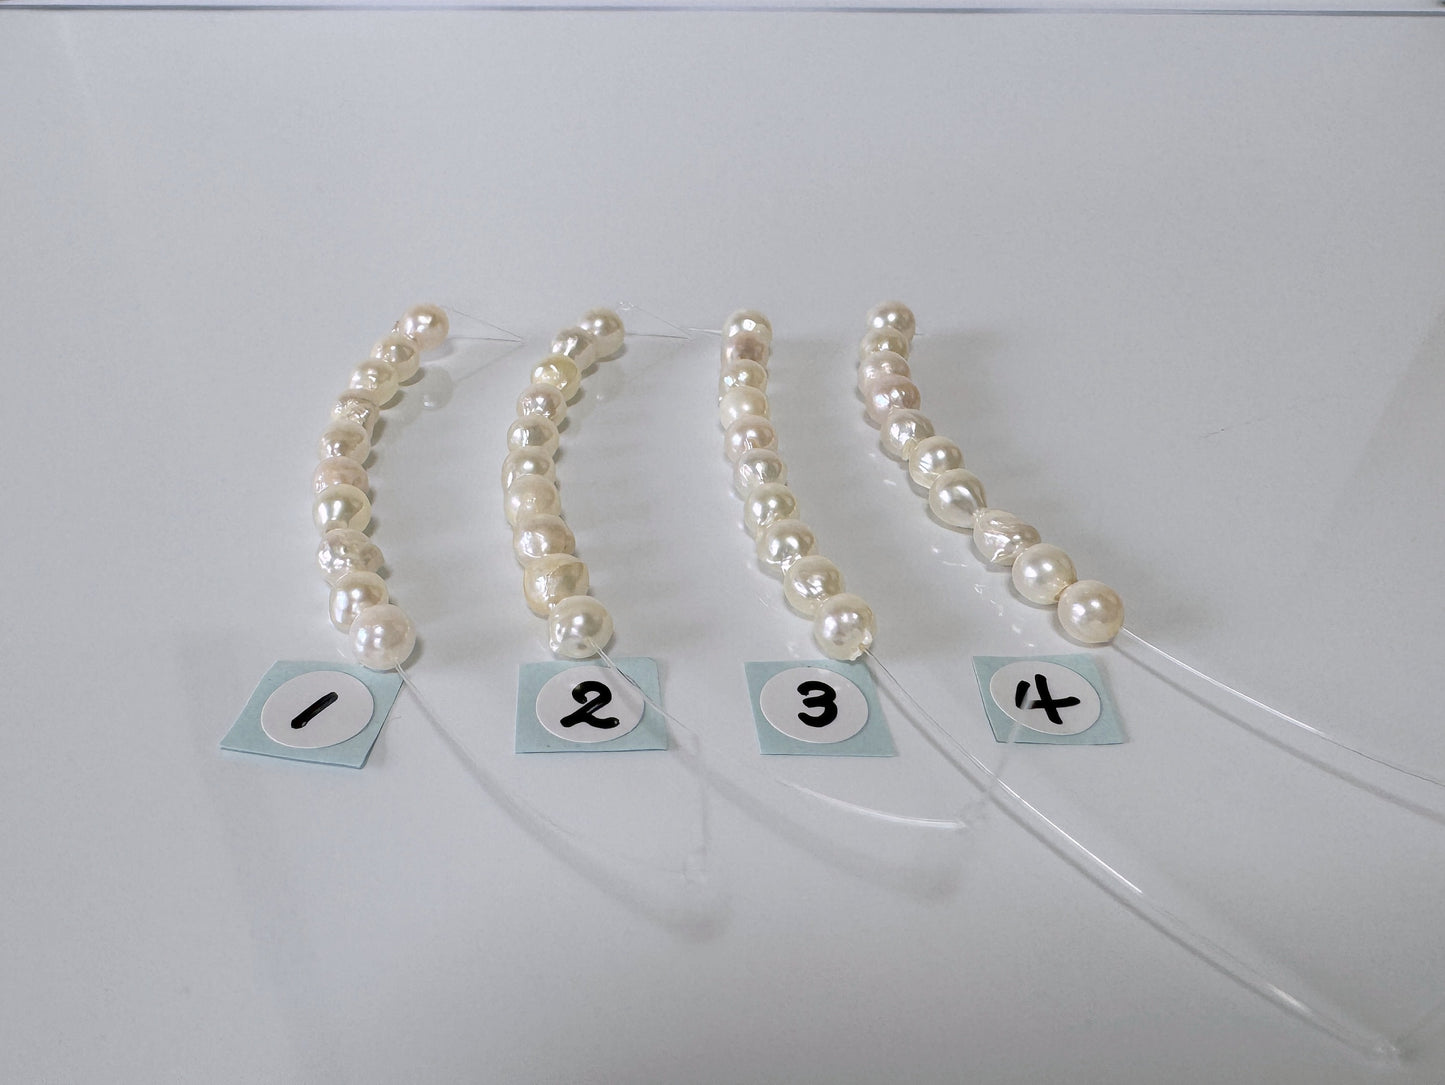 10 Pieces Short Strand of Japanese White Akoya Pearl Beads, 5-5.6mm Semi-baroque, Genuine Akoya Pearl, Cultured in Sea Water